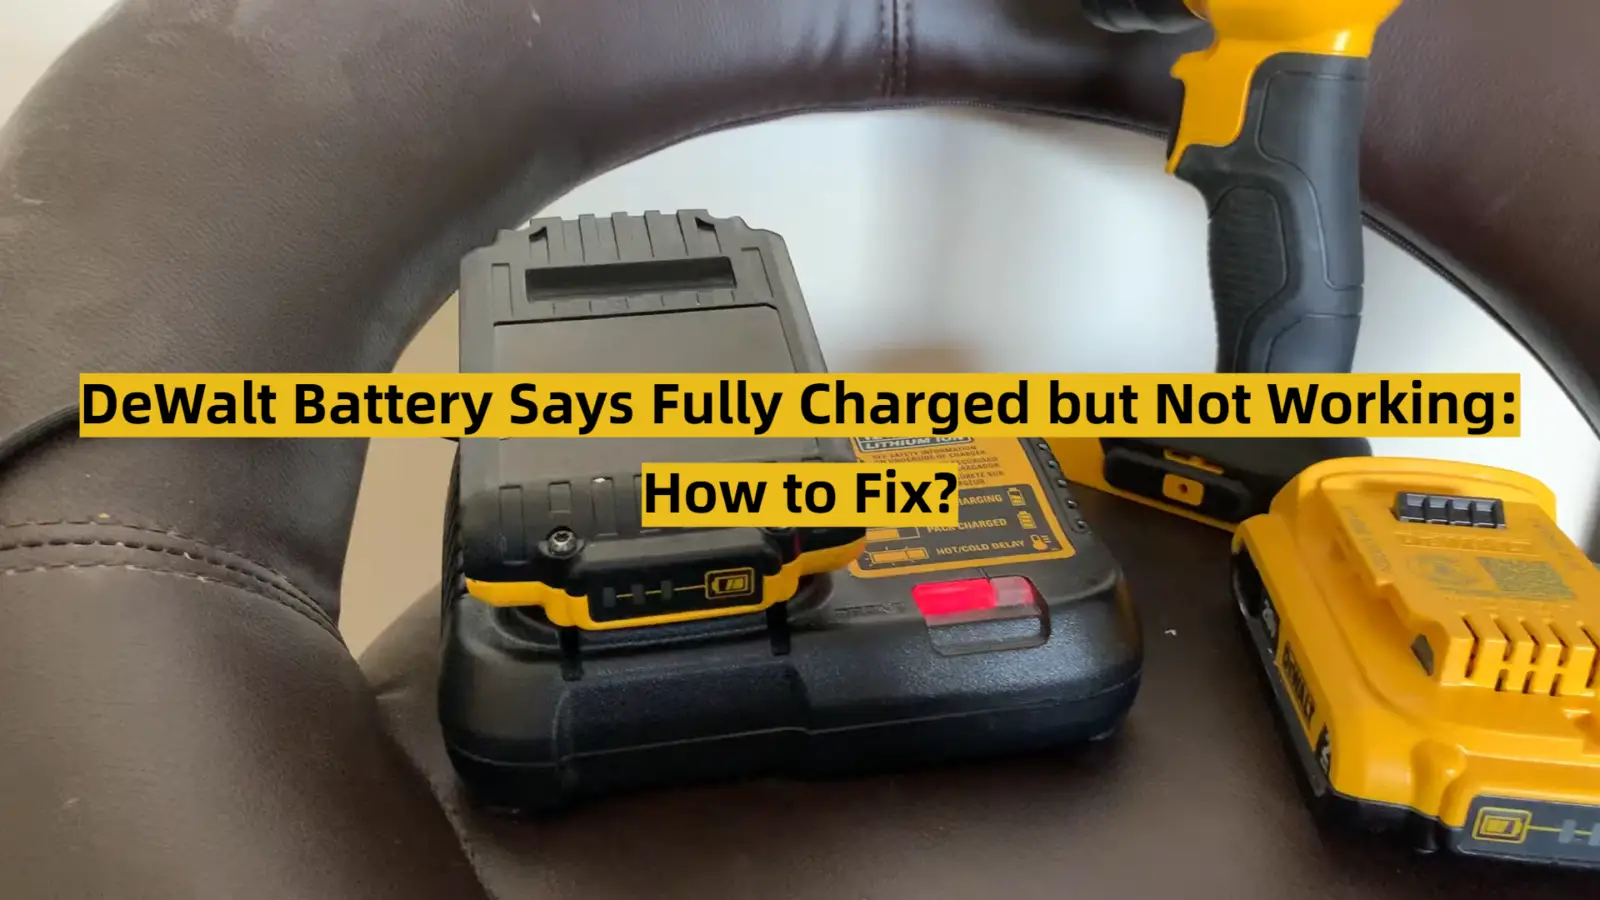 DeWalt Battery Says Fully Charged but Not Working: How to Fix?